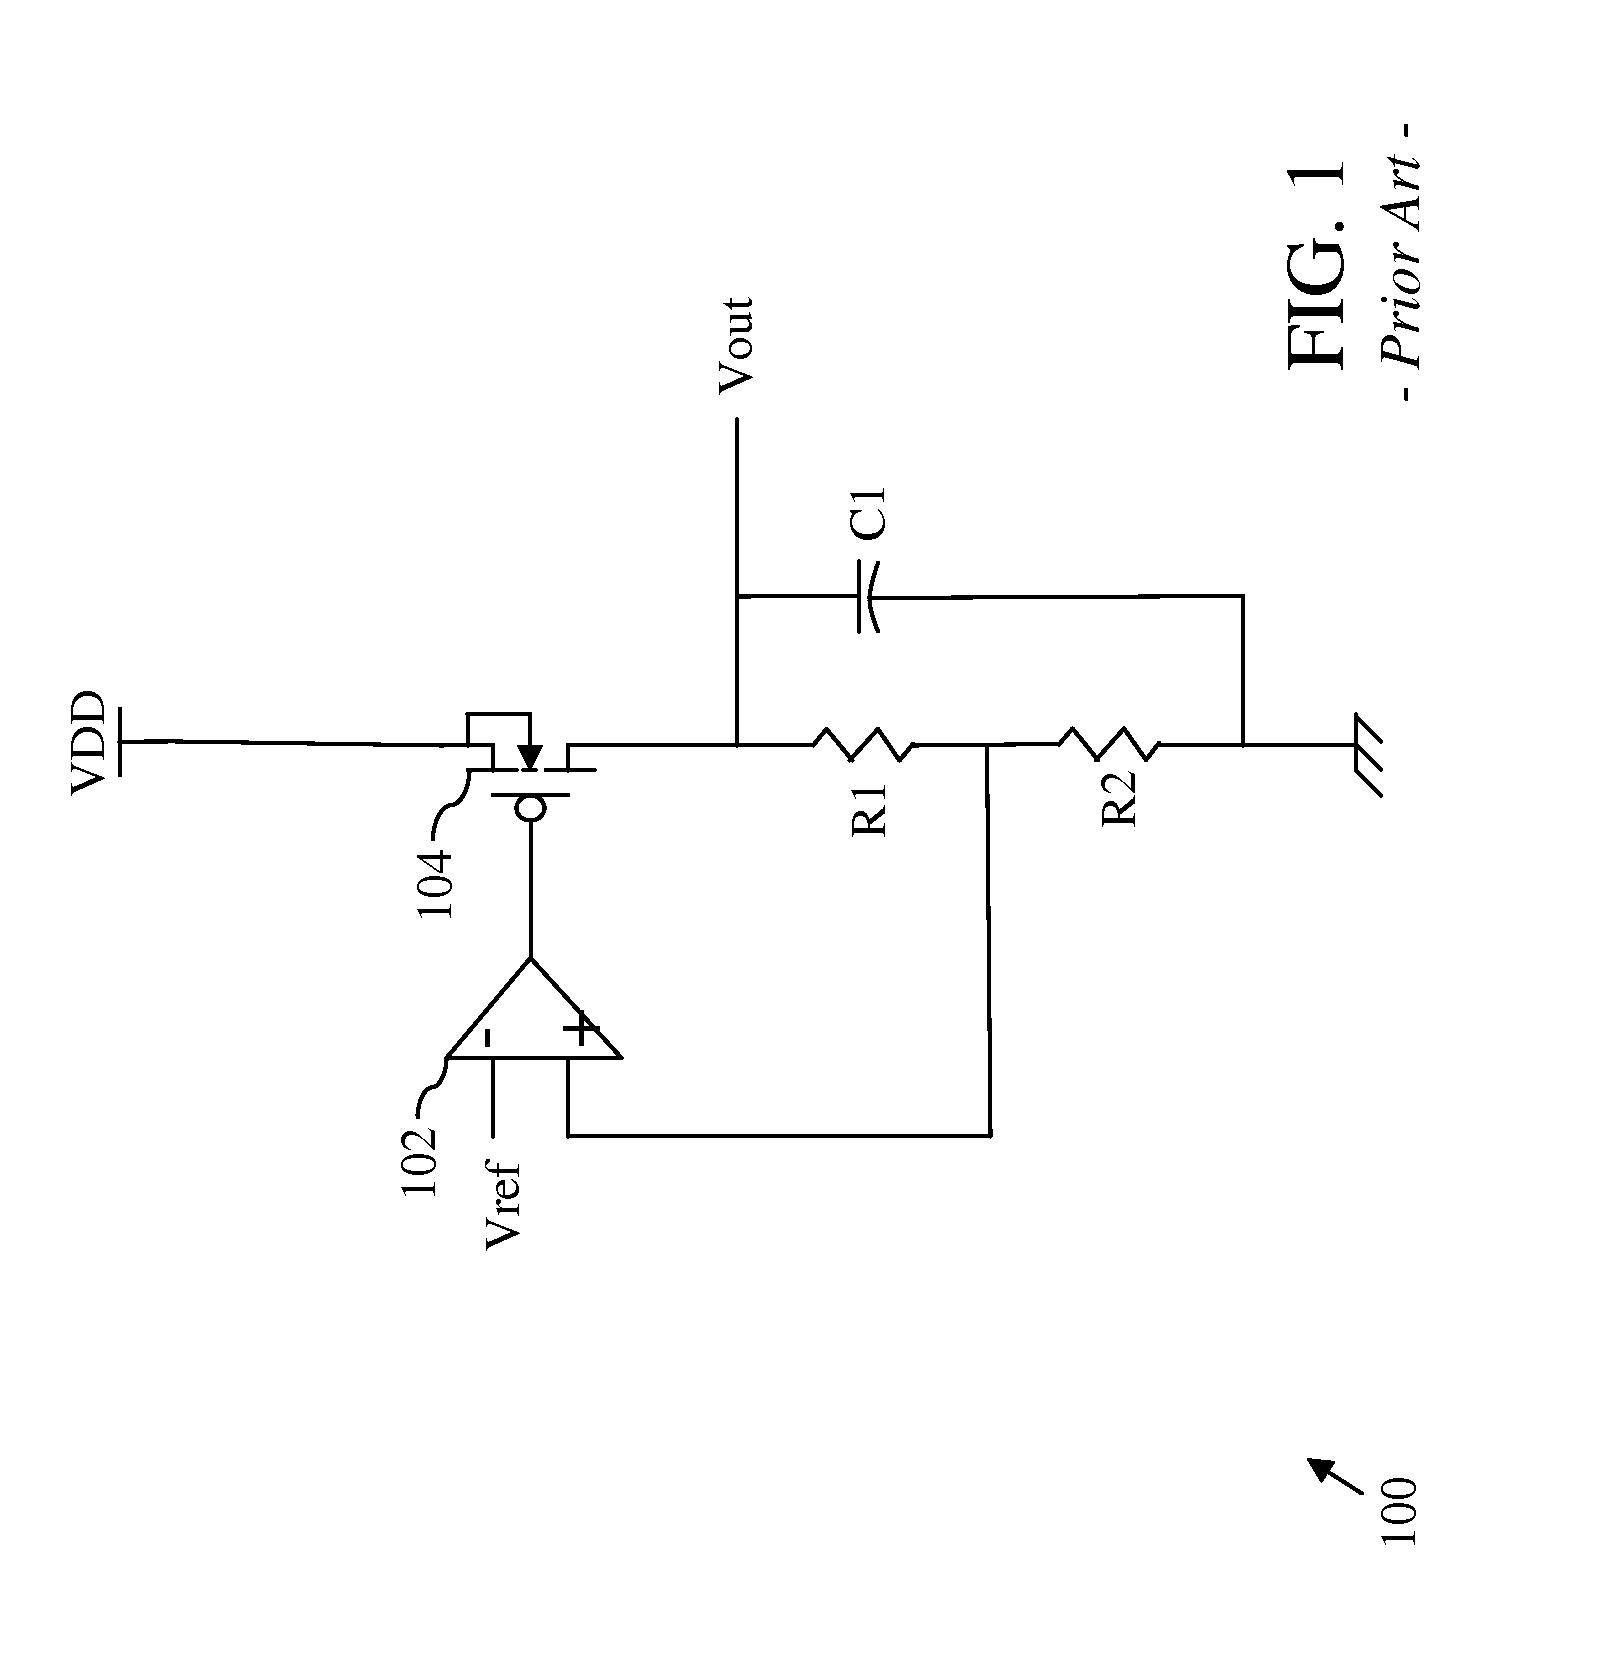 Ldo linear regulator with improved transient response